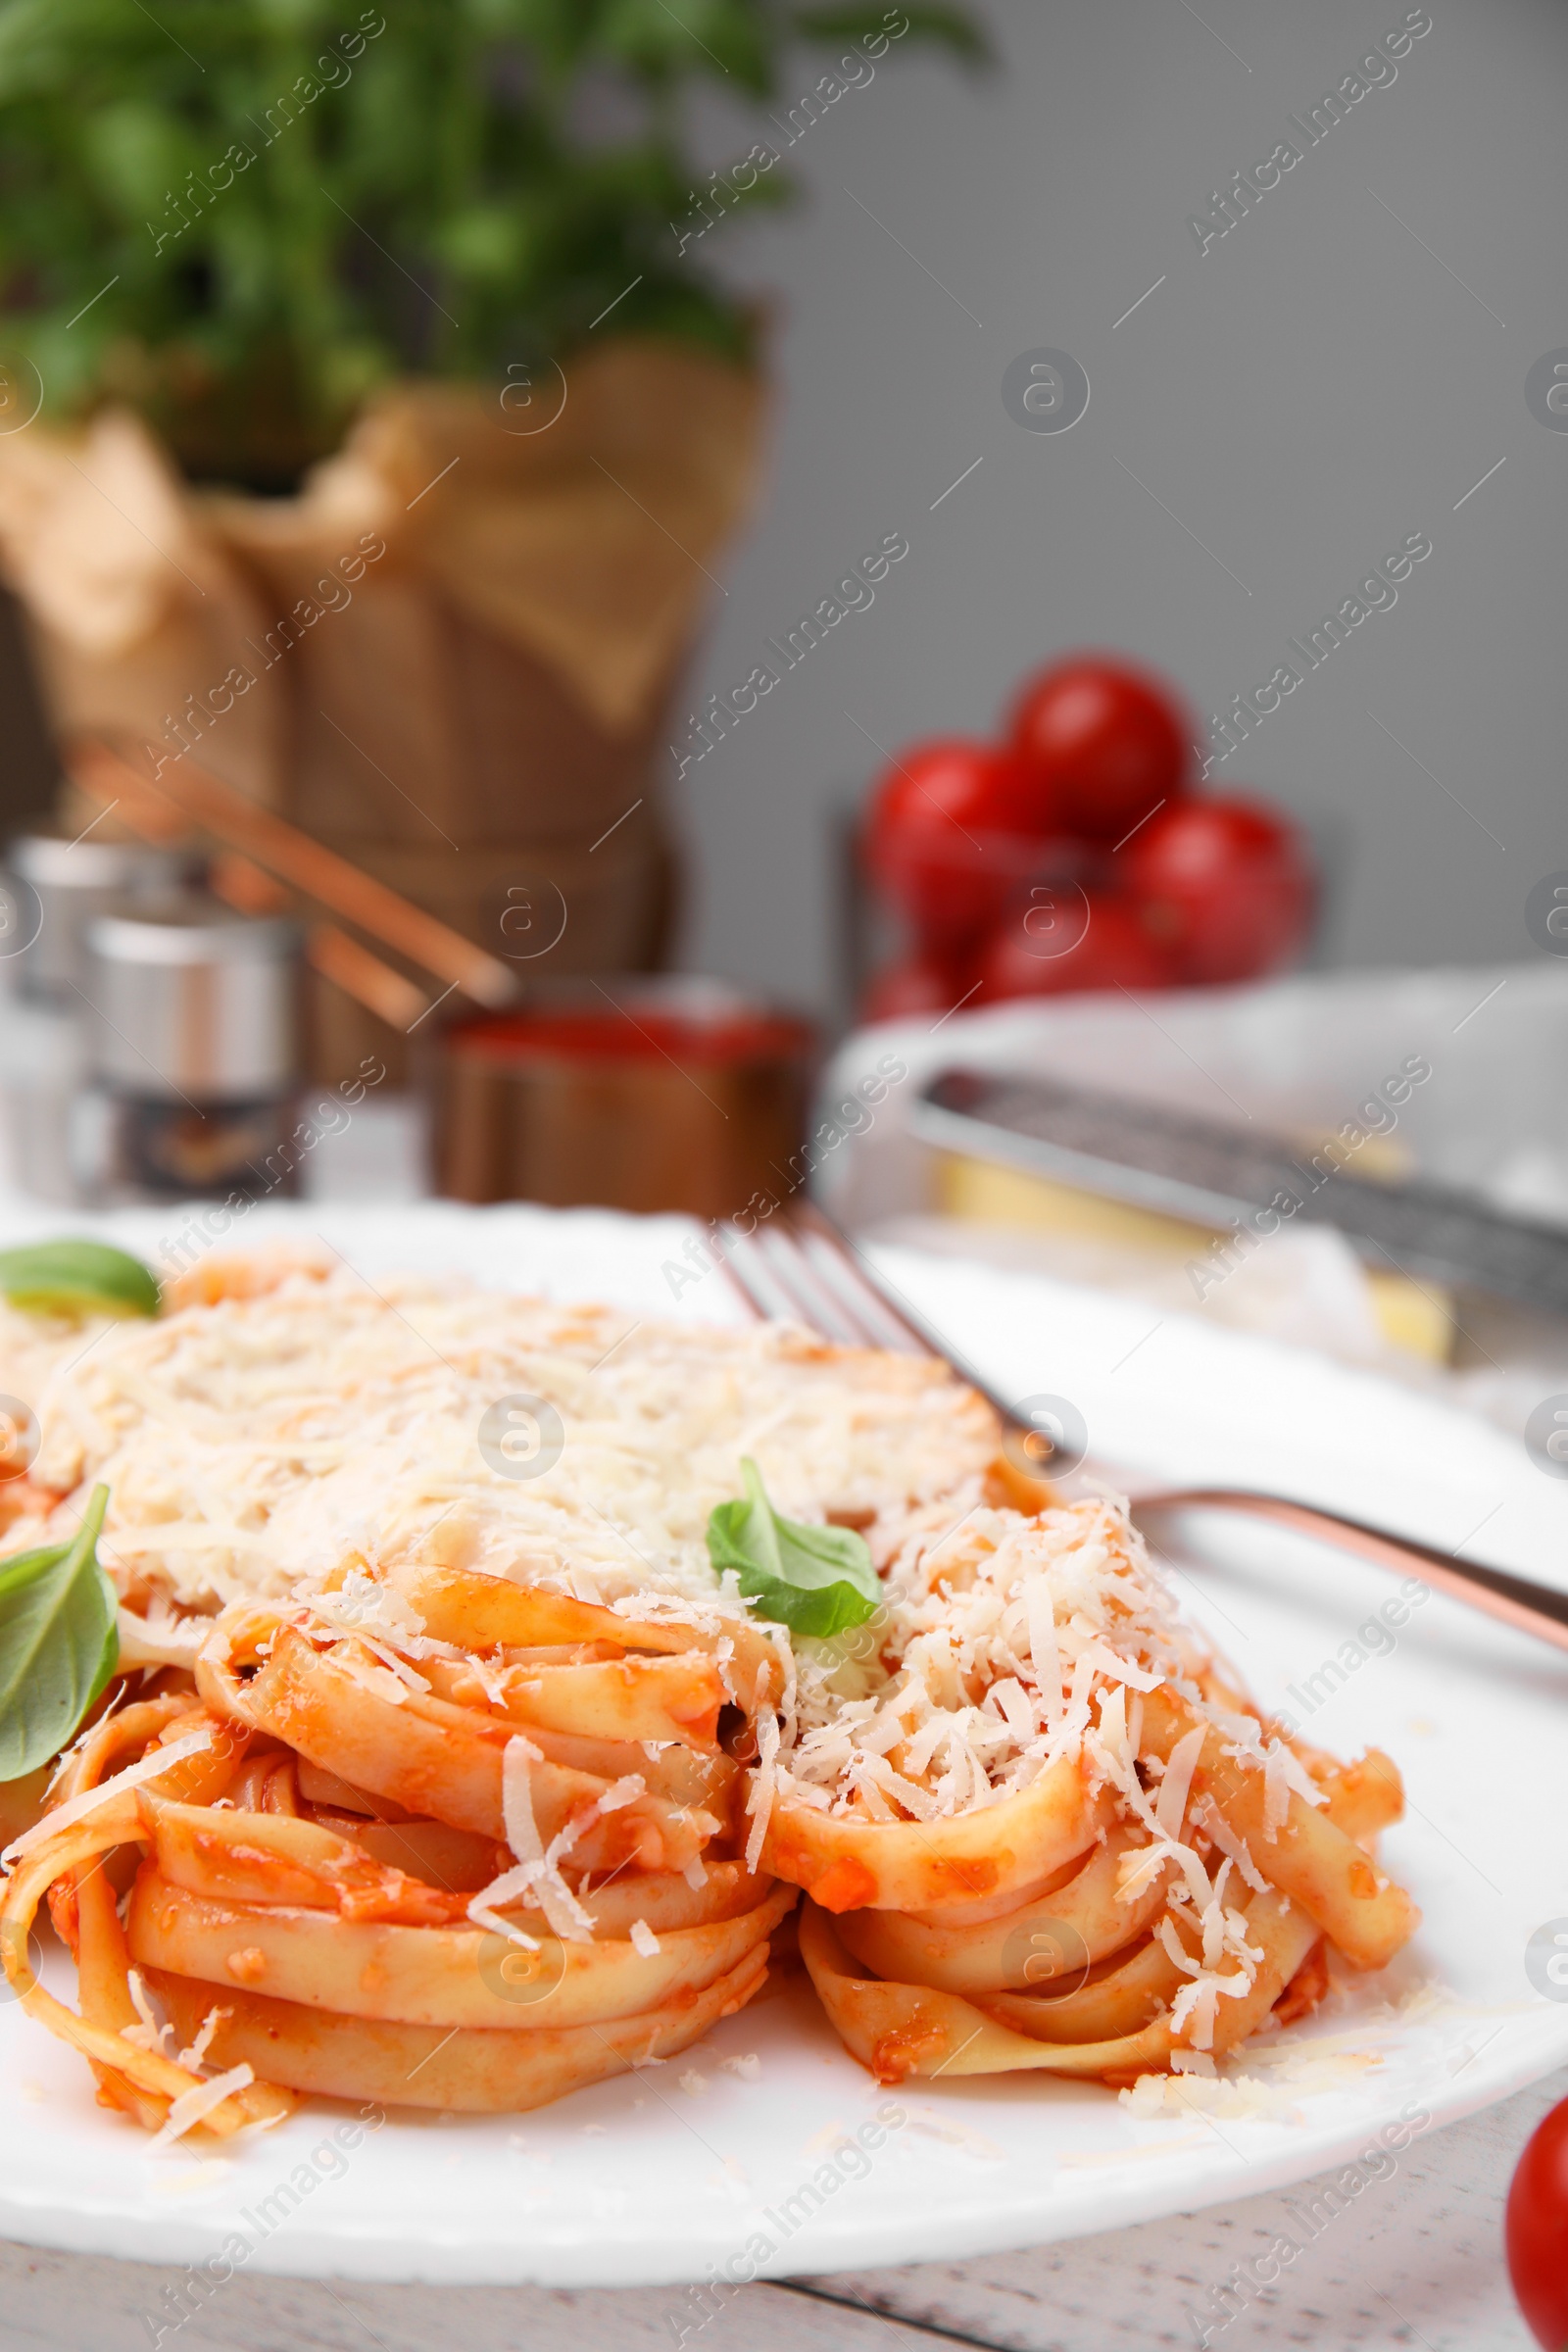 Photo of Delicious pasta with tomato sauce, chicken and parmesan cheese on white wooden table